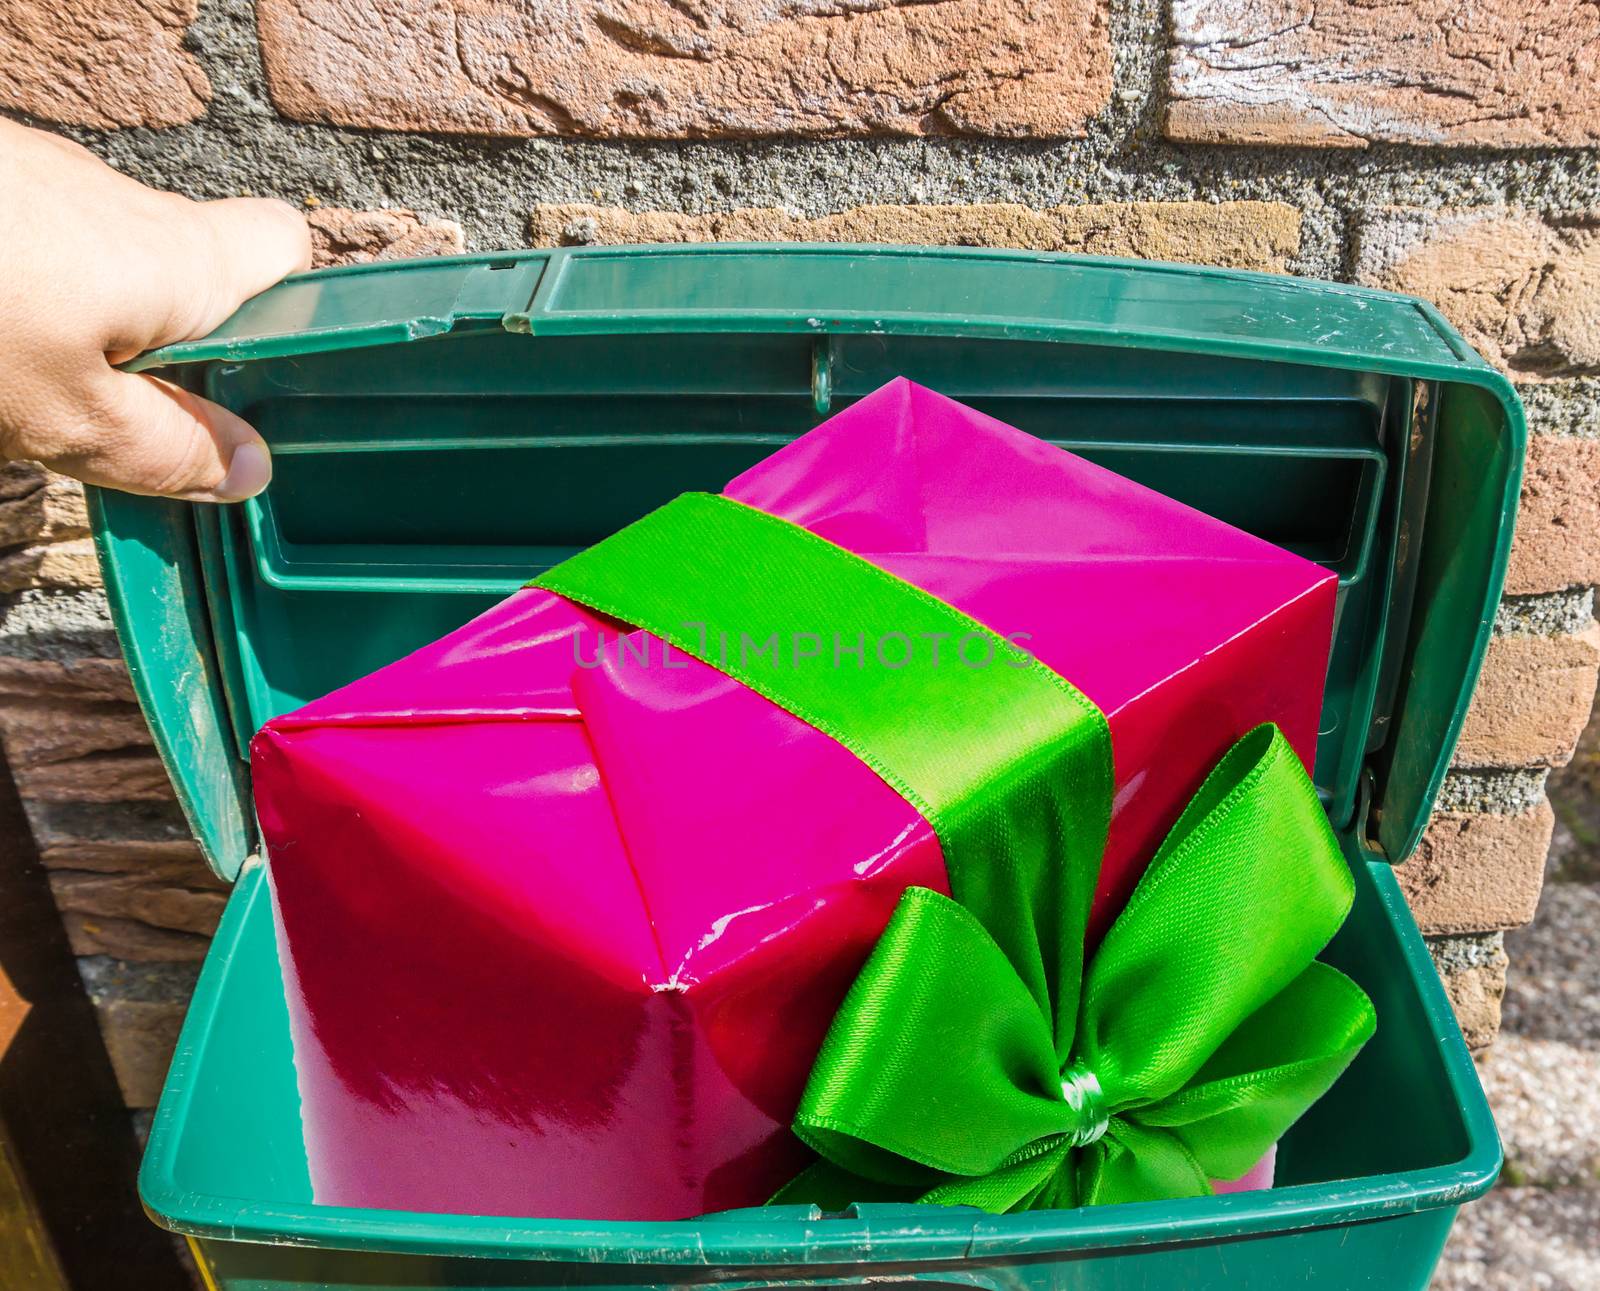 Big pink Christmas present with ribbon in a classic green mailbox